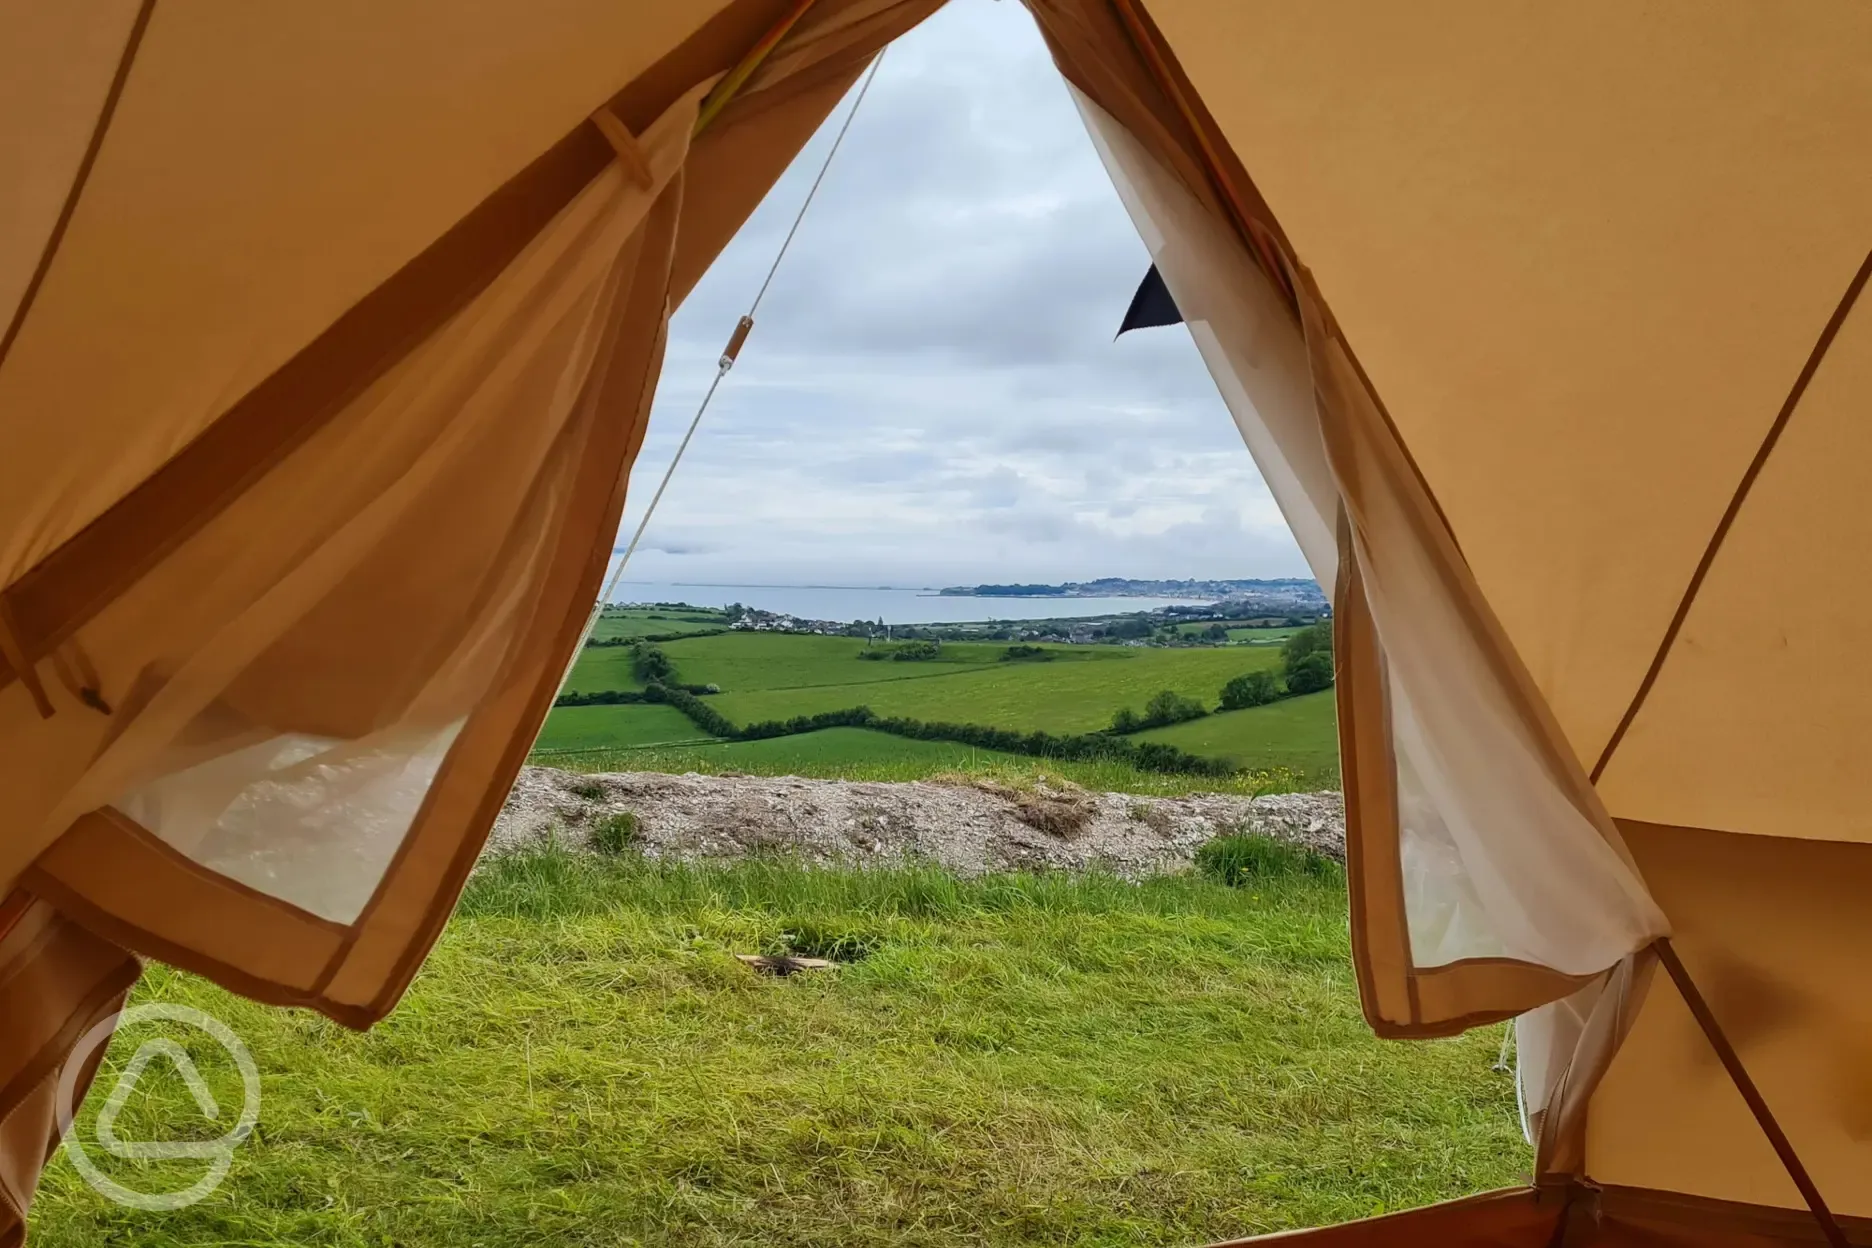 Views from bell tent